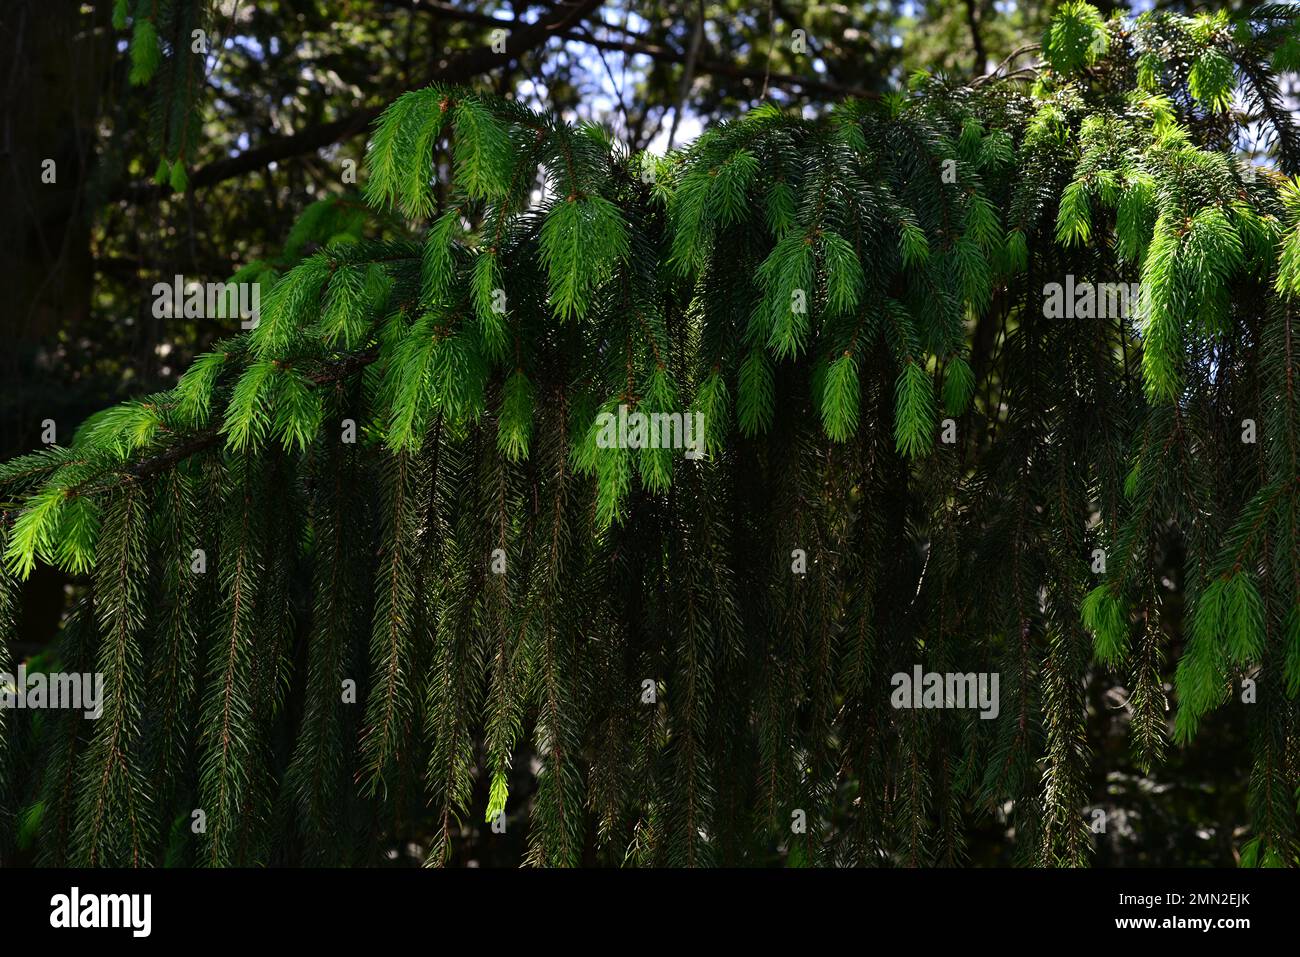 A branch of European spruce or Picea abies with young shoots. Cultivar Virgata or Snake branch spruce. Stock Photo